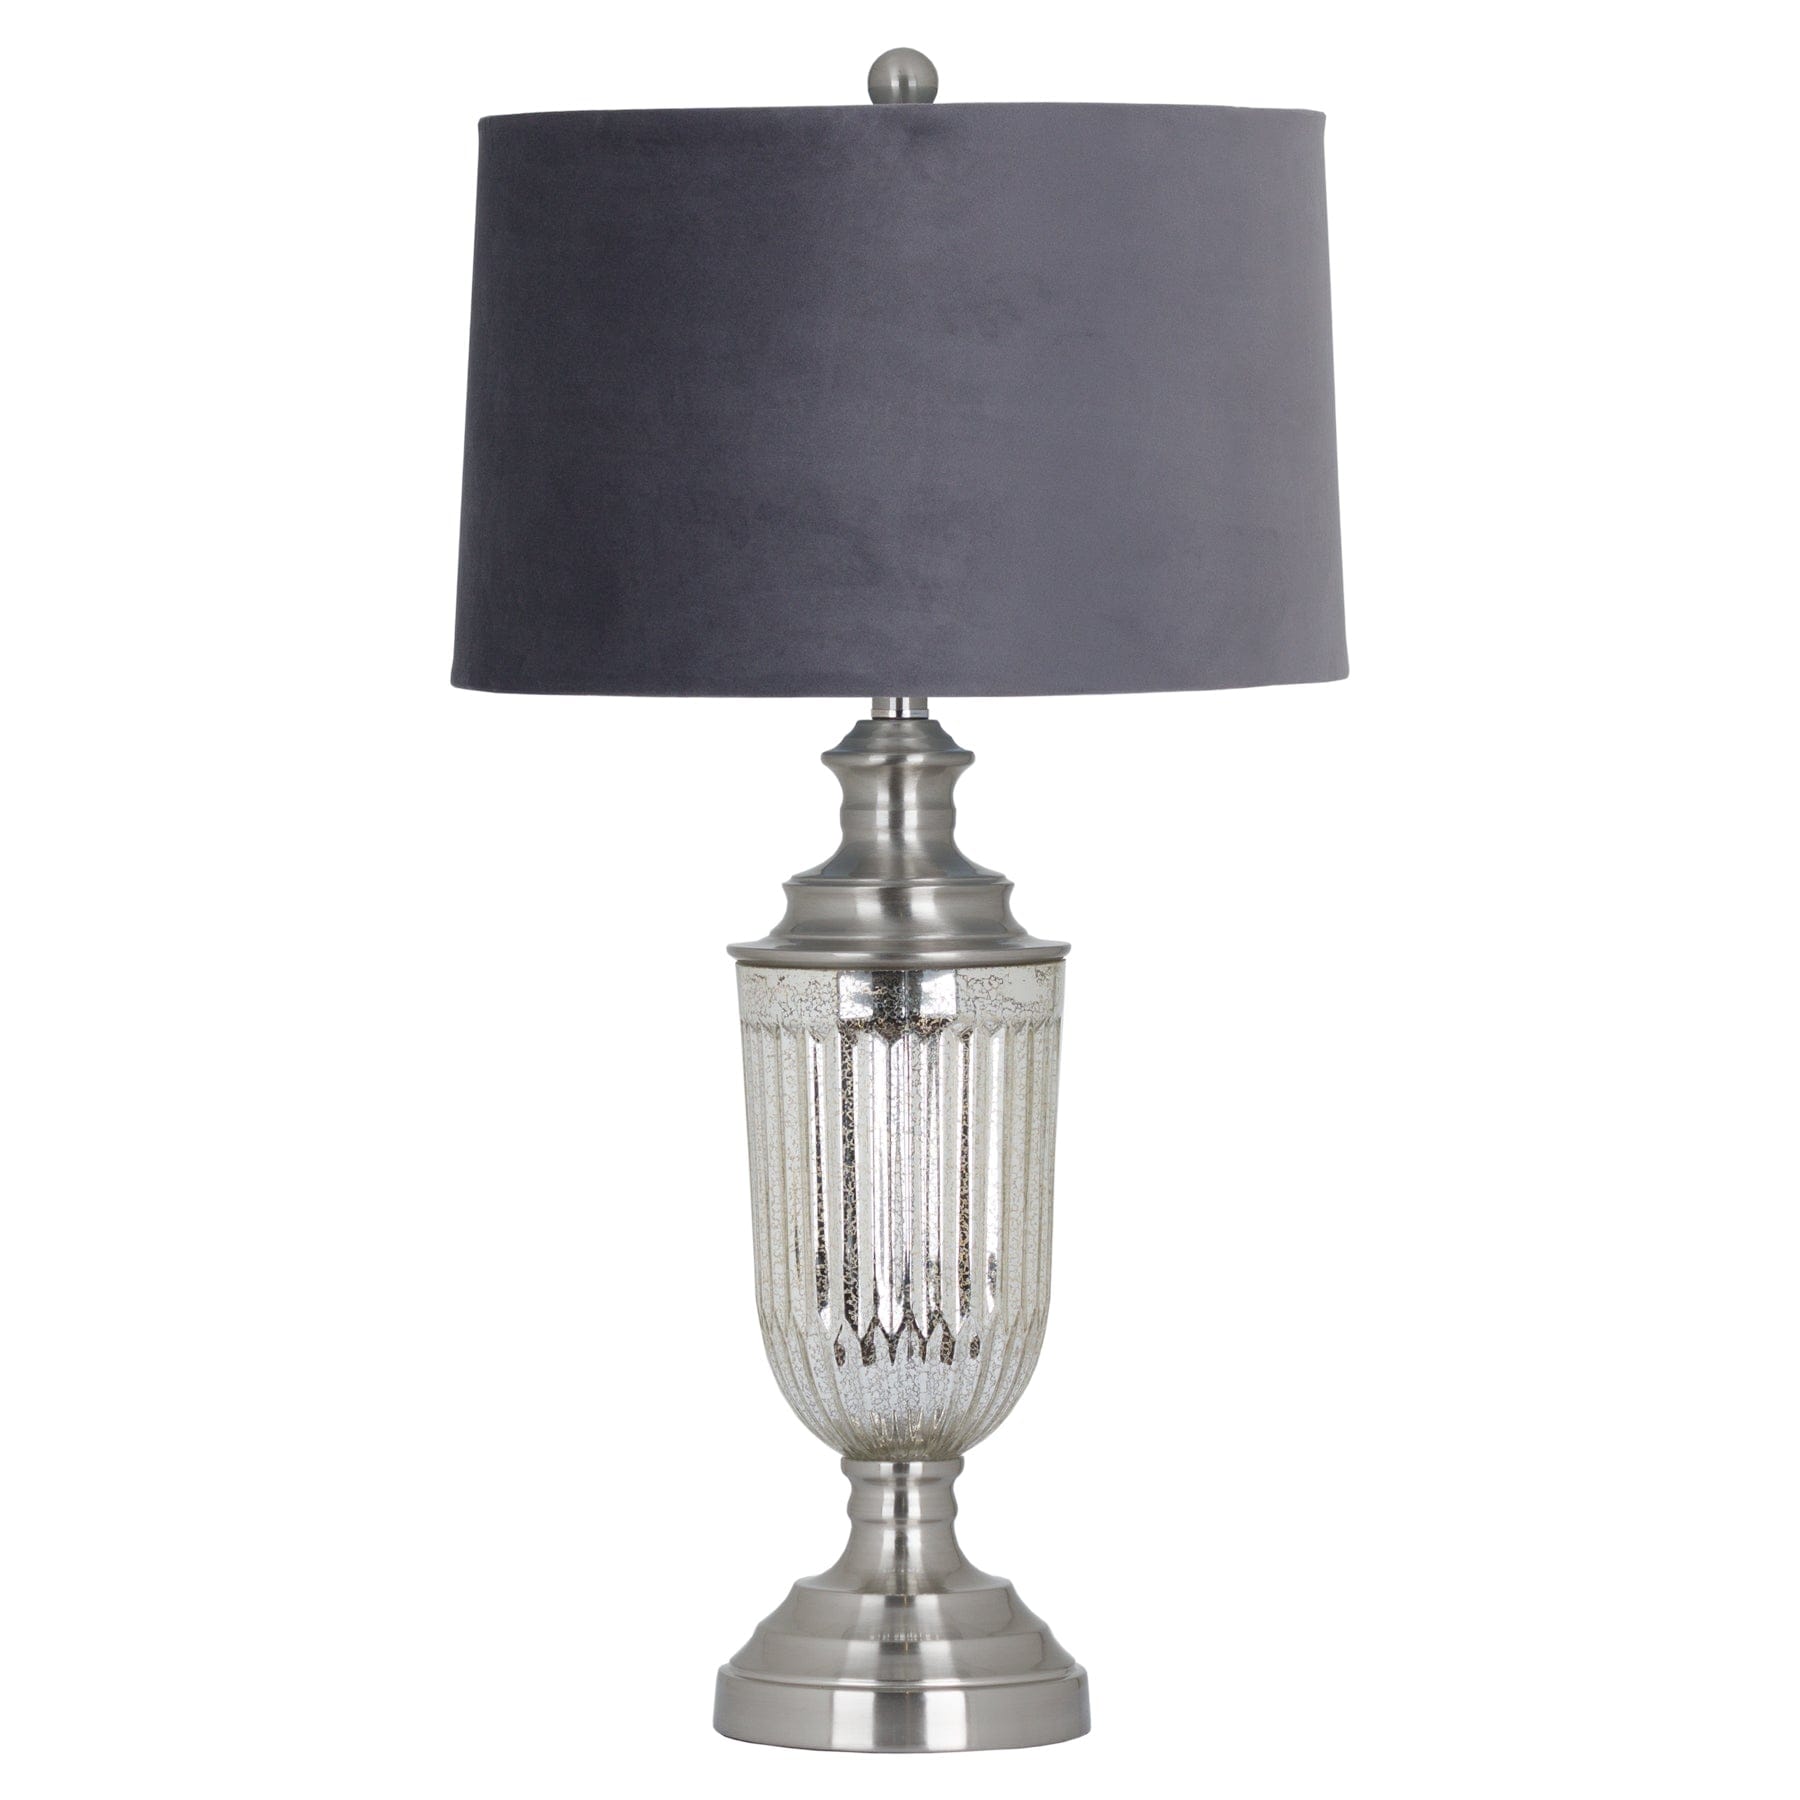 Hill Interiors Table Lamp Penelope Glass Table Lamp